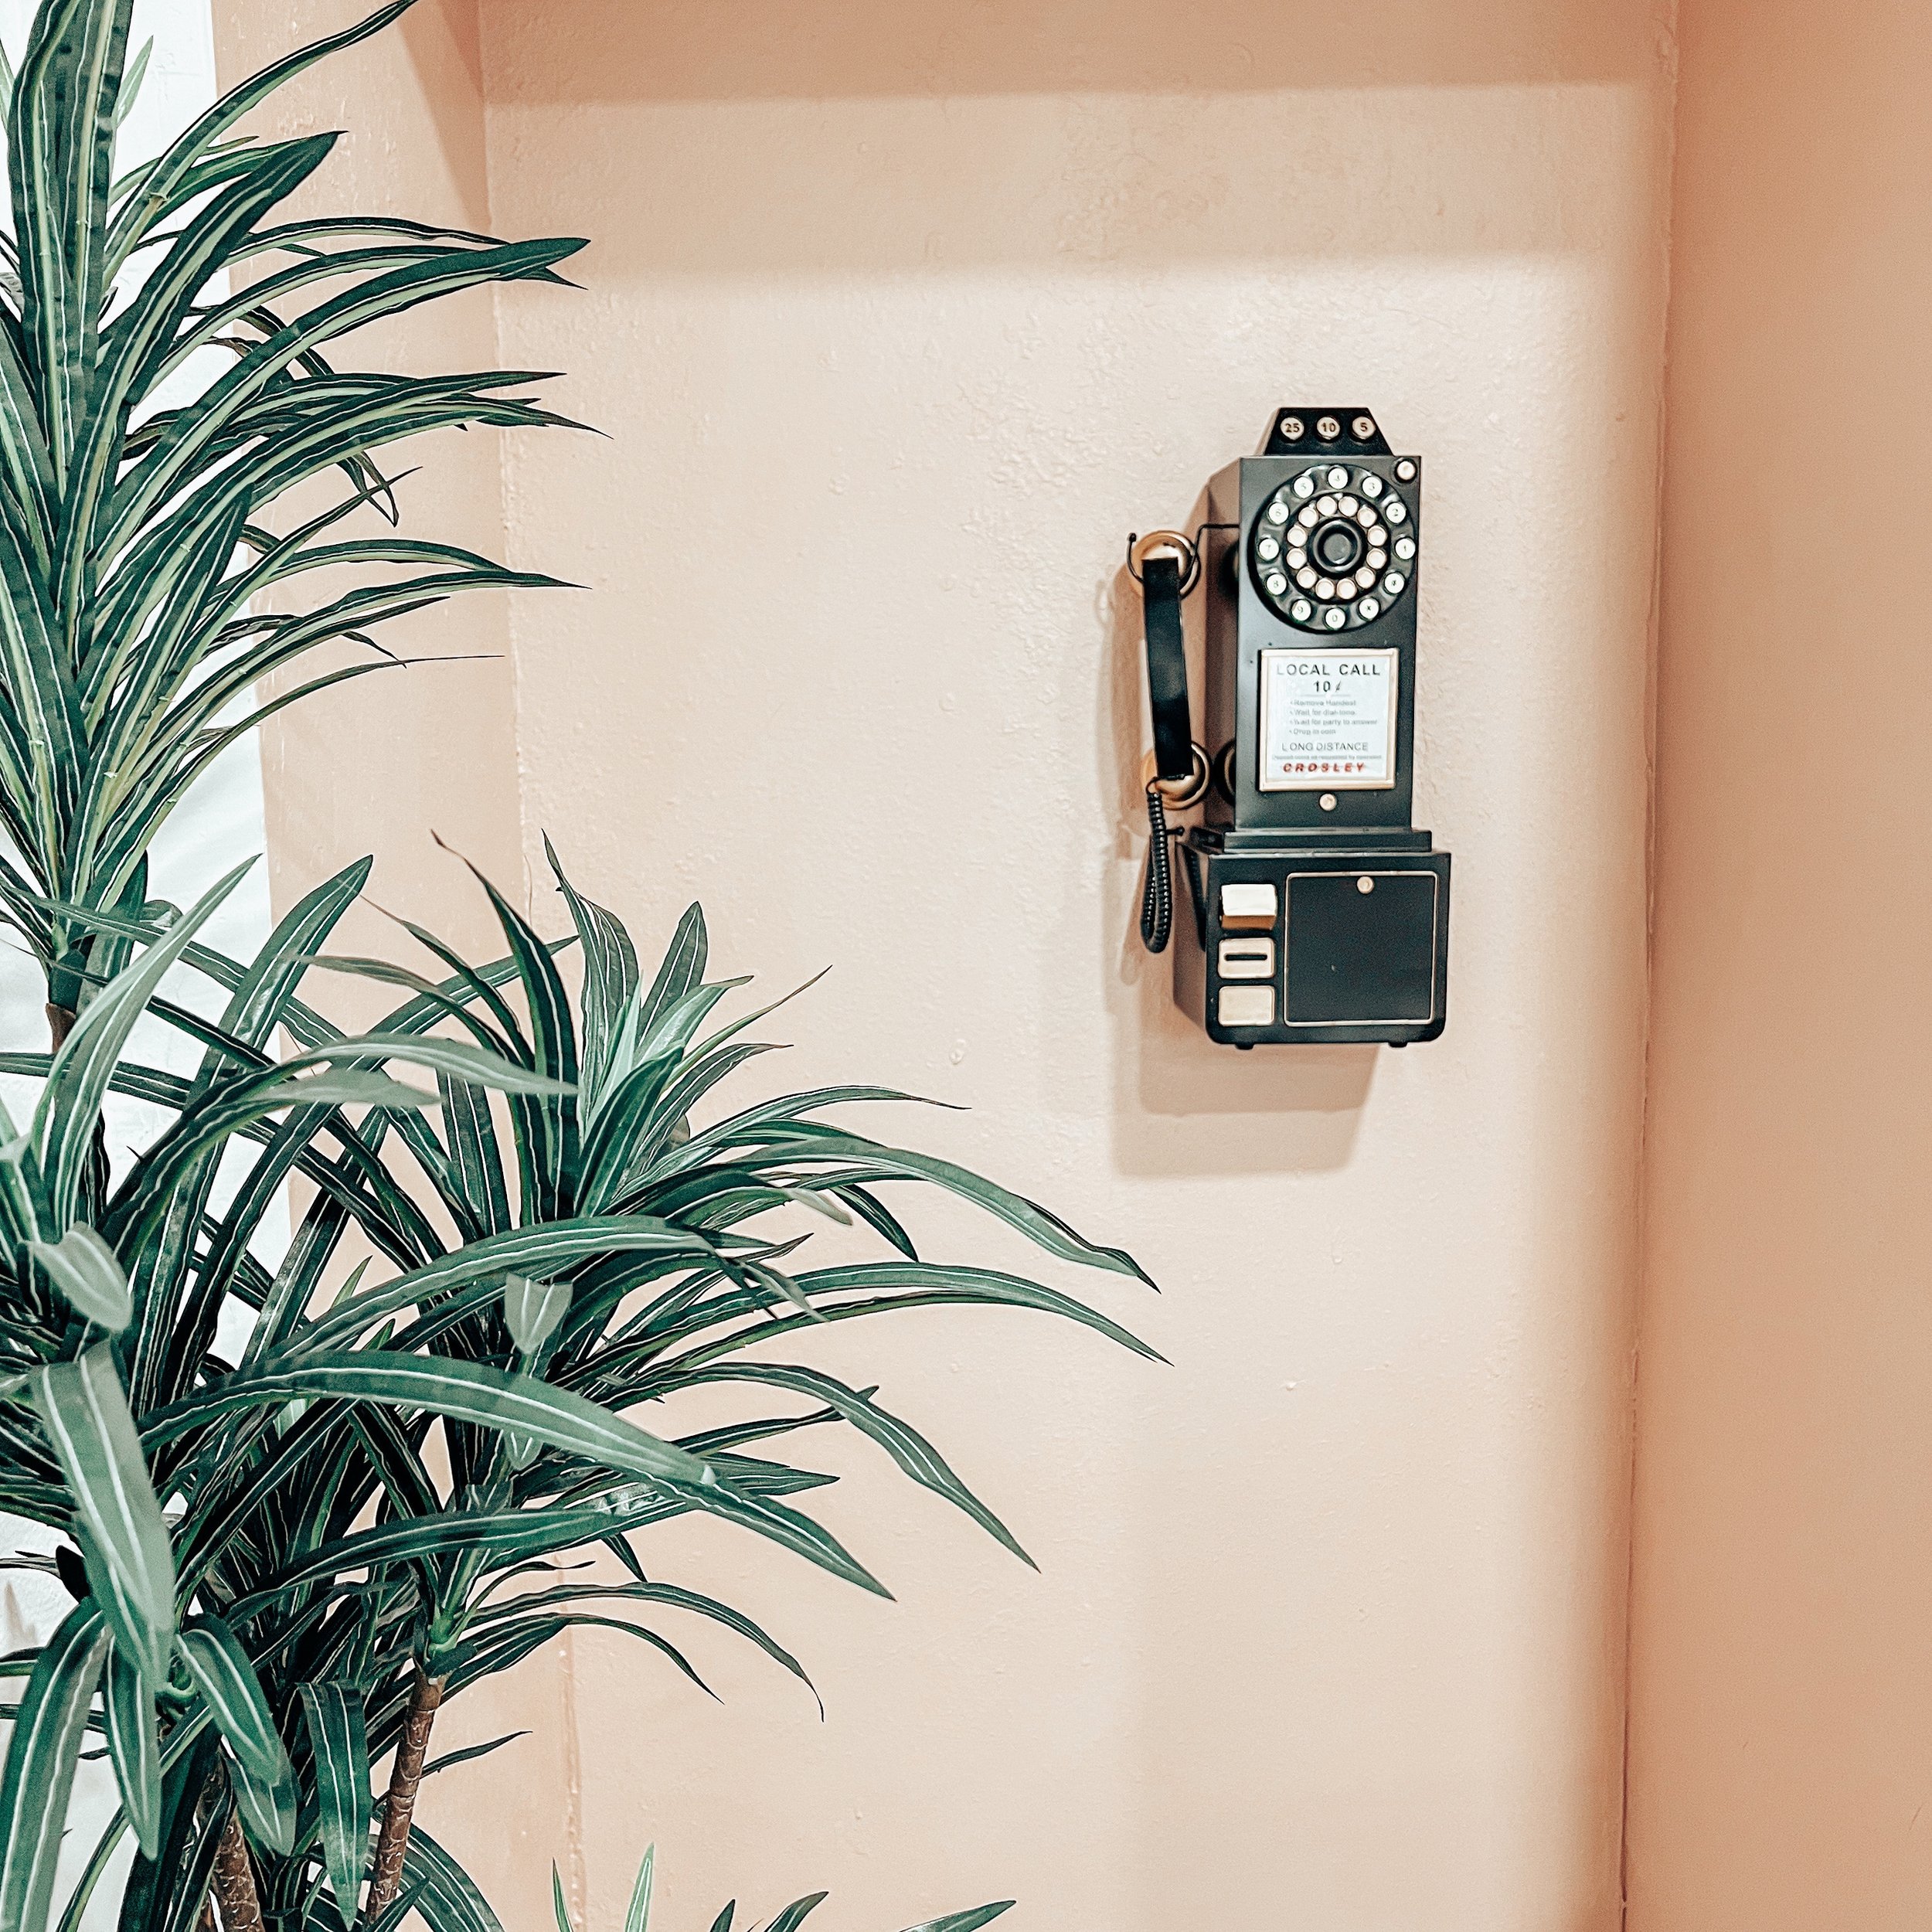 The glow ✨ you seek is just one phone call away! 

We are obsessed with this little selfie spot! 🤳

#selfie #vintagephone #photoop #phonebooth #selfiespot #funvibes #montrosecolorado #montrosespa #montroseco #montroseesthetician